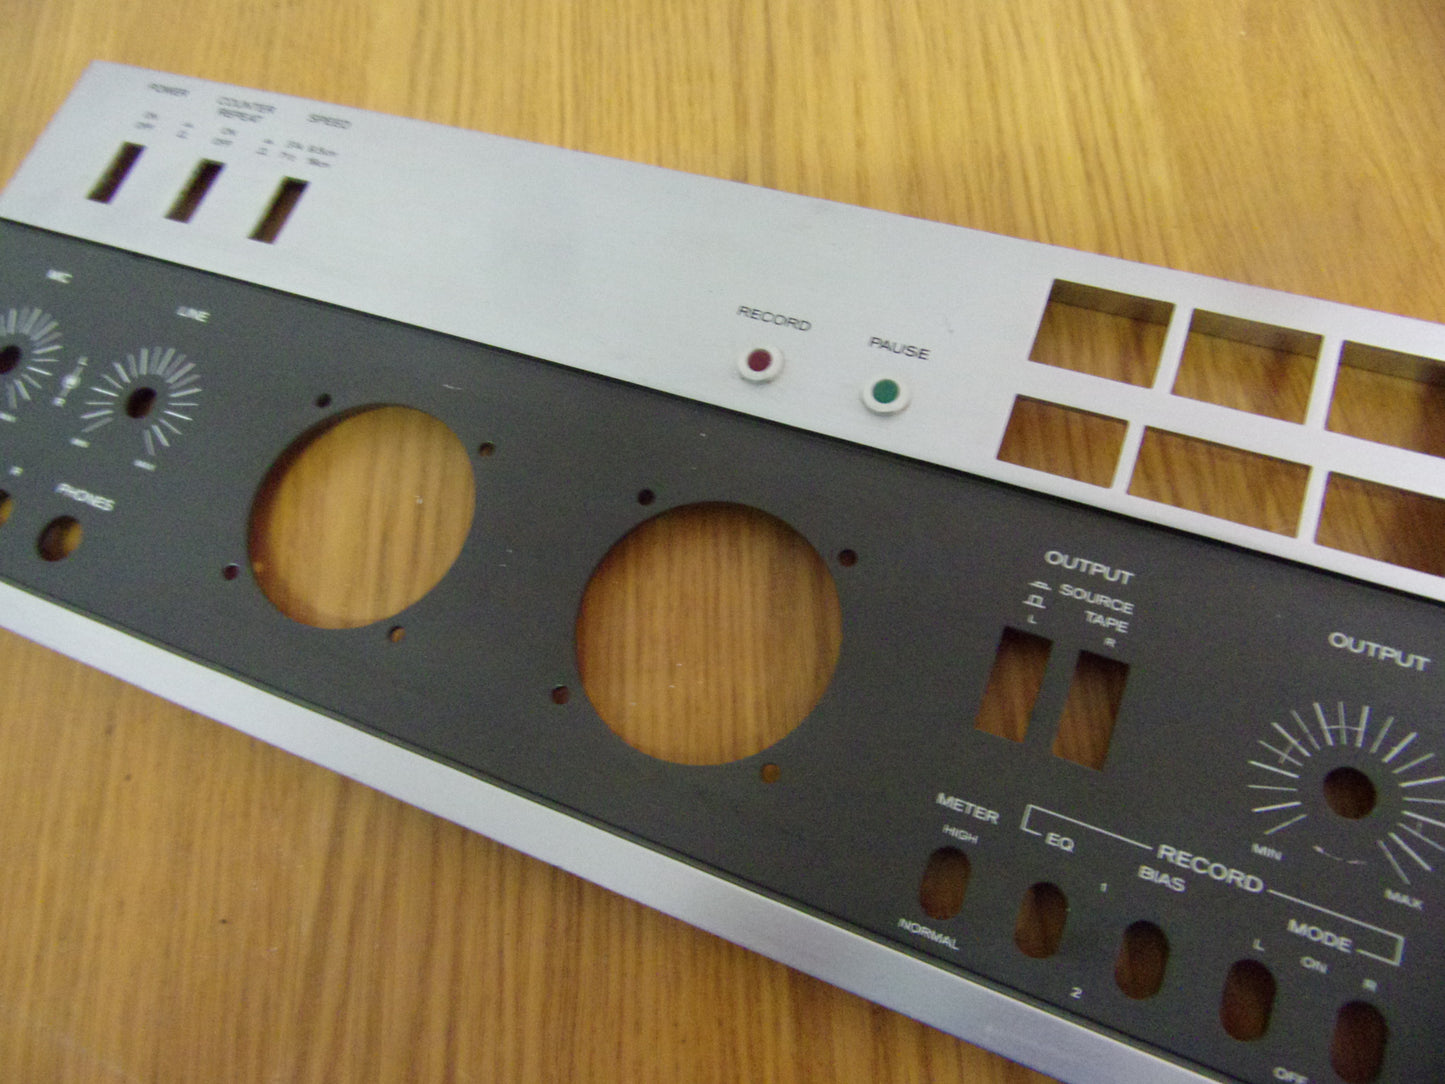 TEAC A-4300SX Main front lower cosmetic panel